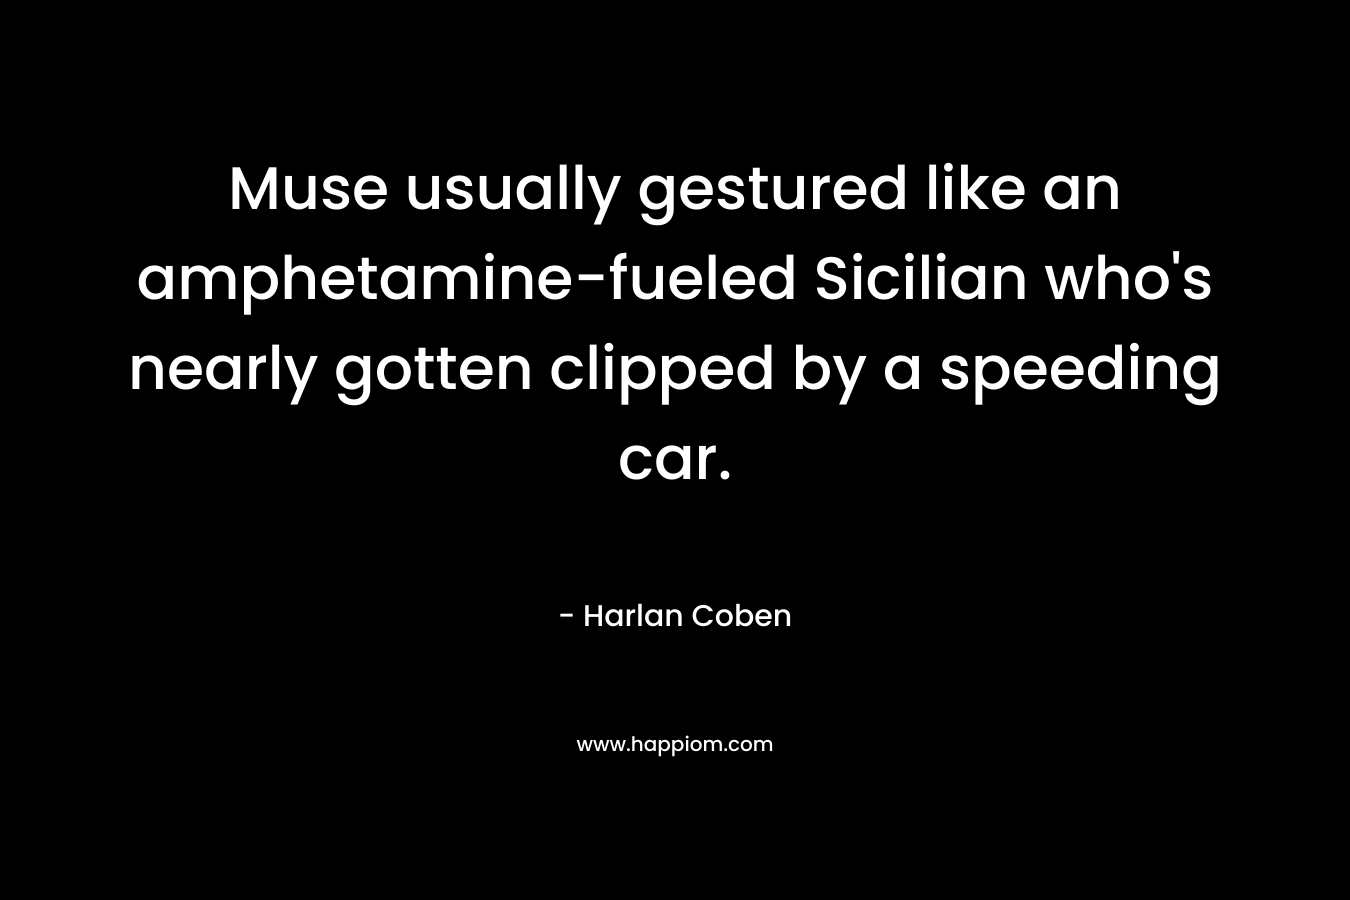 Muse usually gestured like an amphetamine-fueled Sicilian who's nearly gotten clipped by a speeding car.